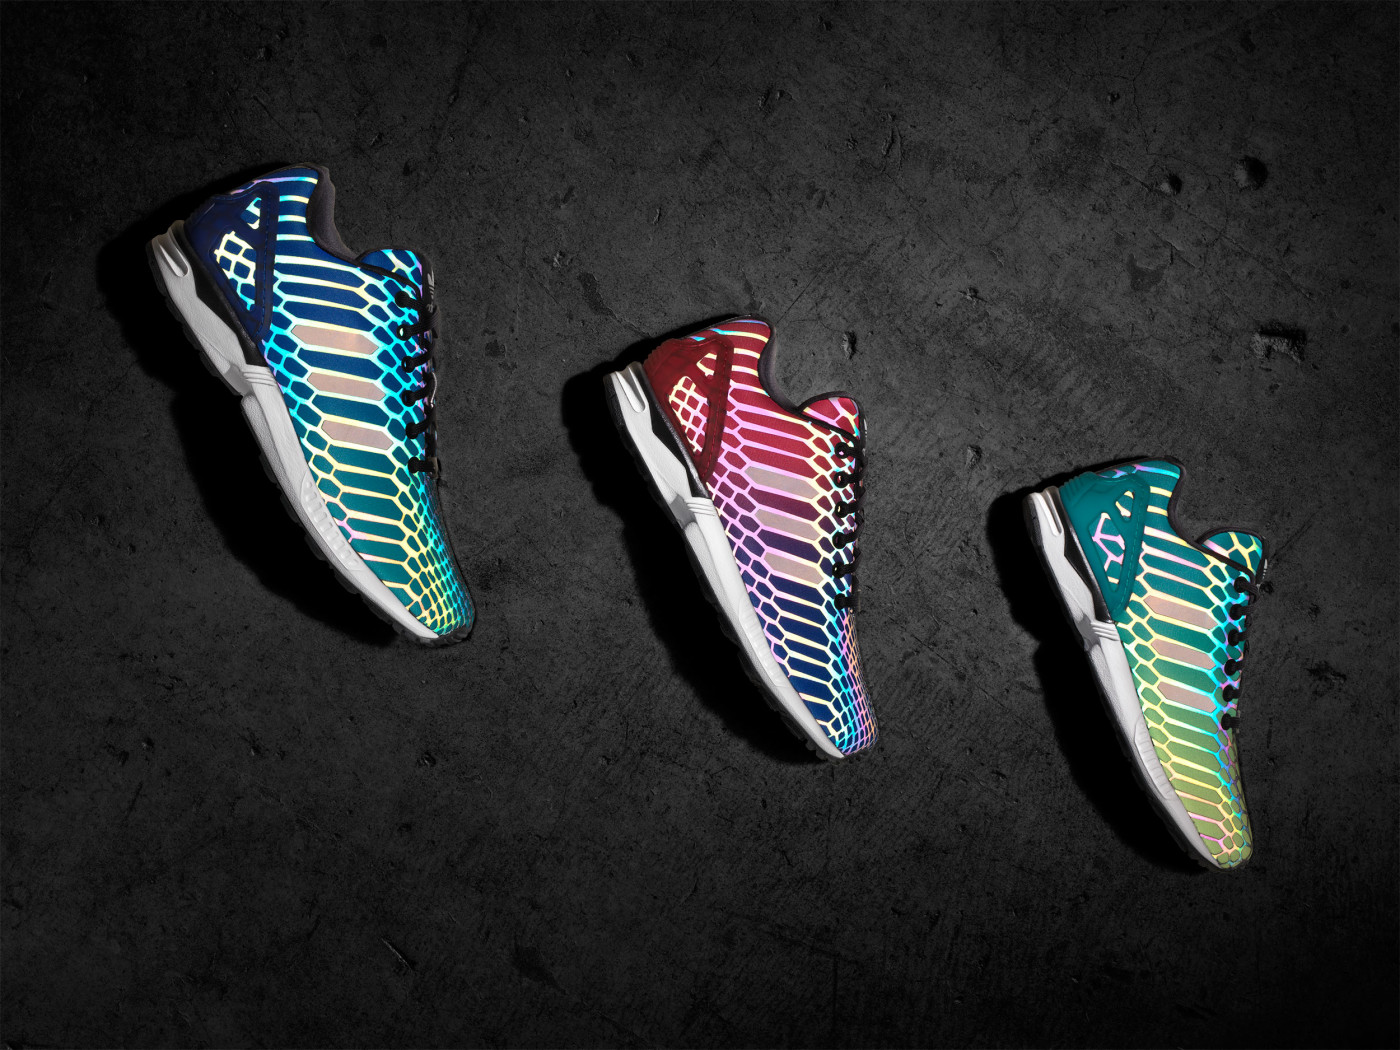 adidas zx flux xeno pack